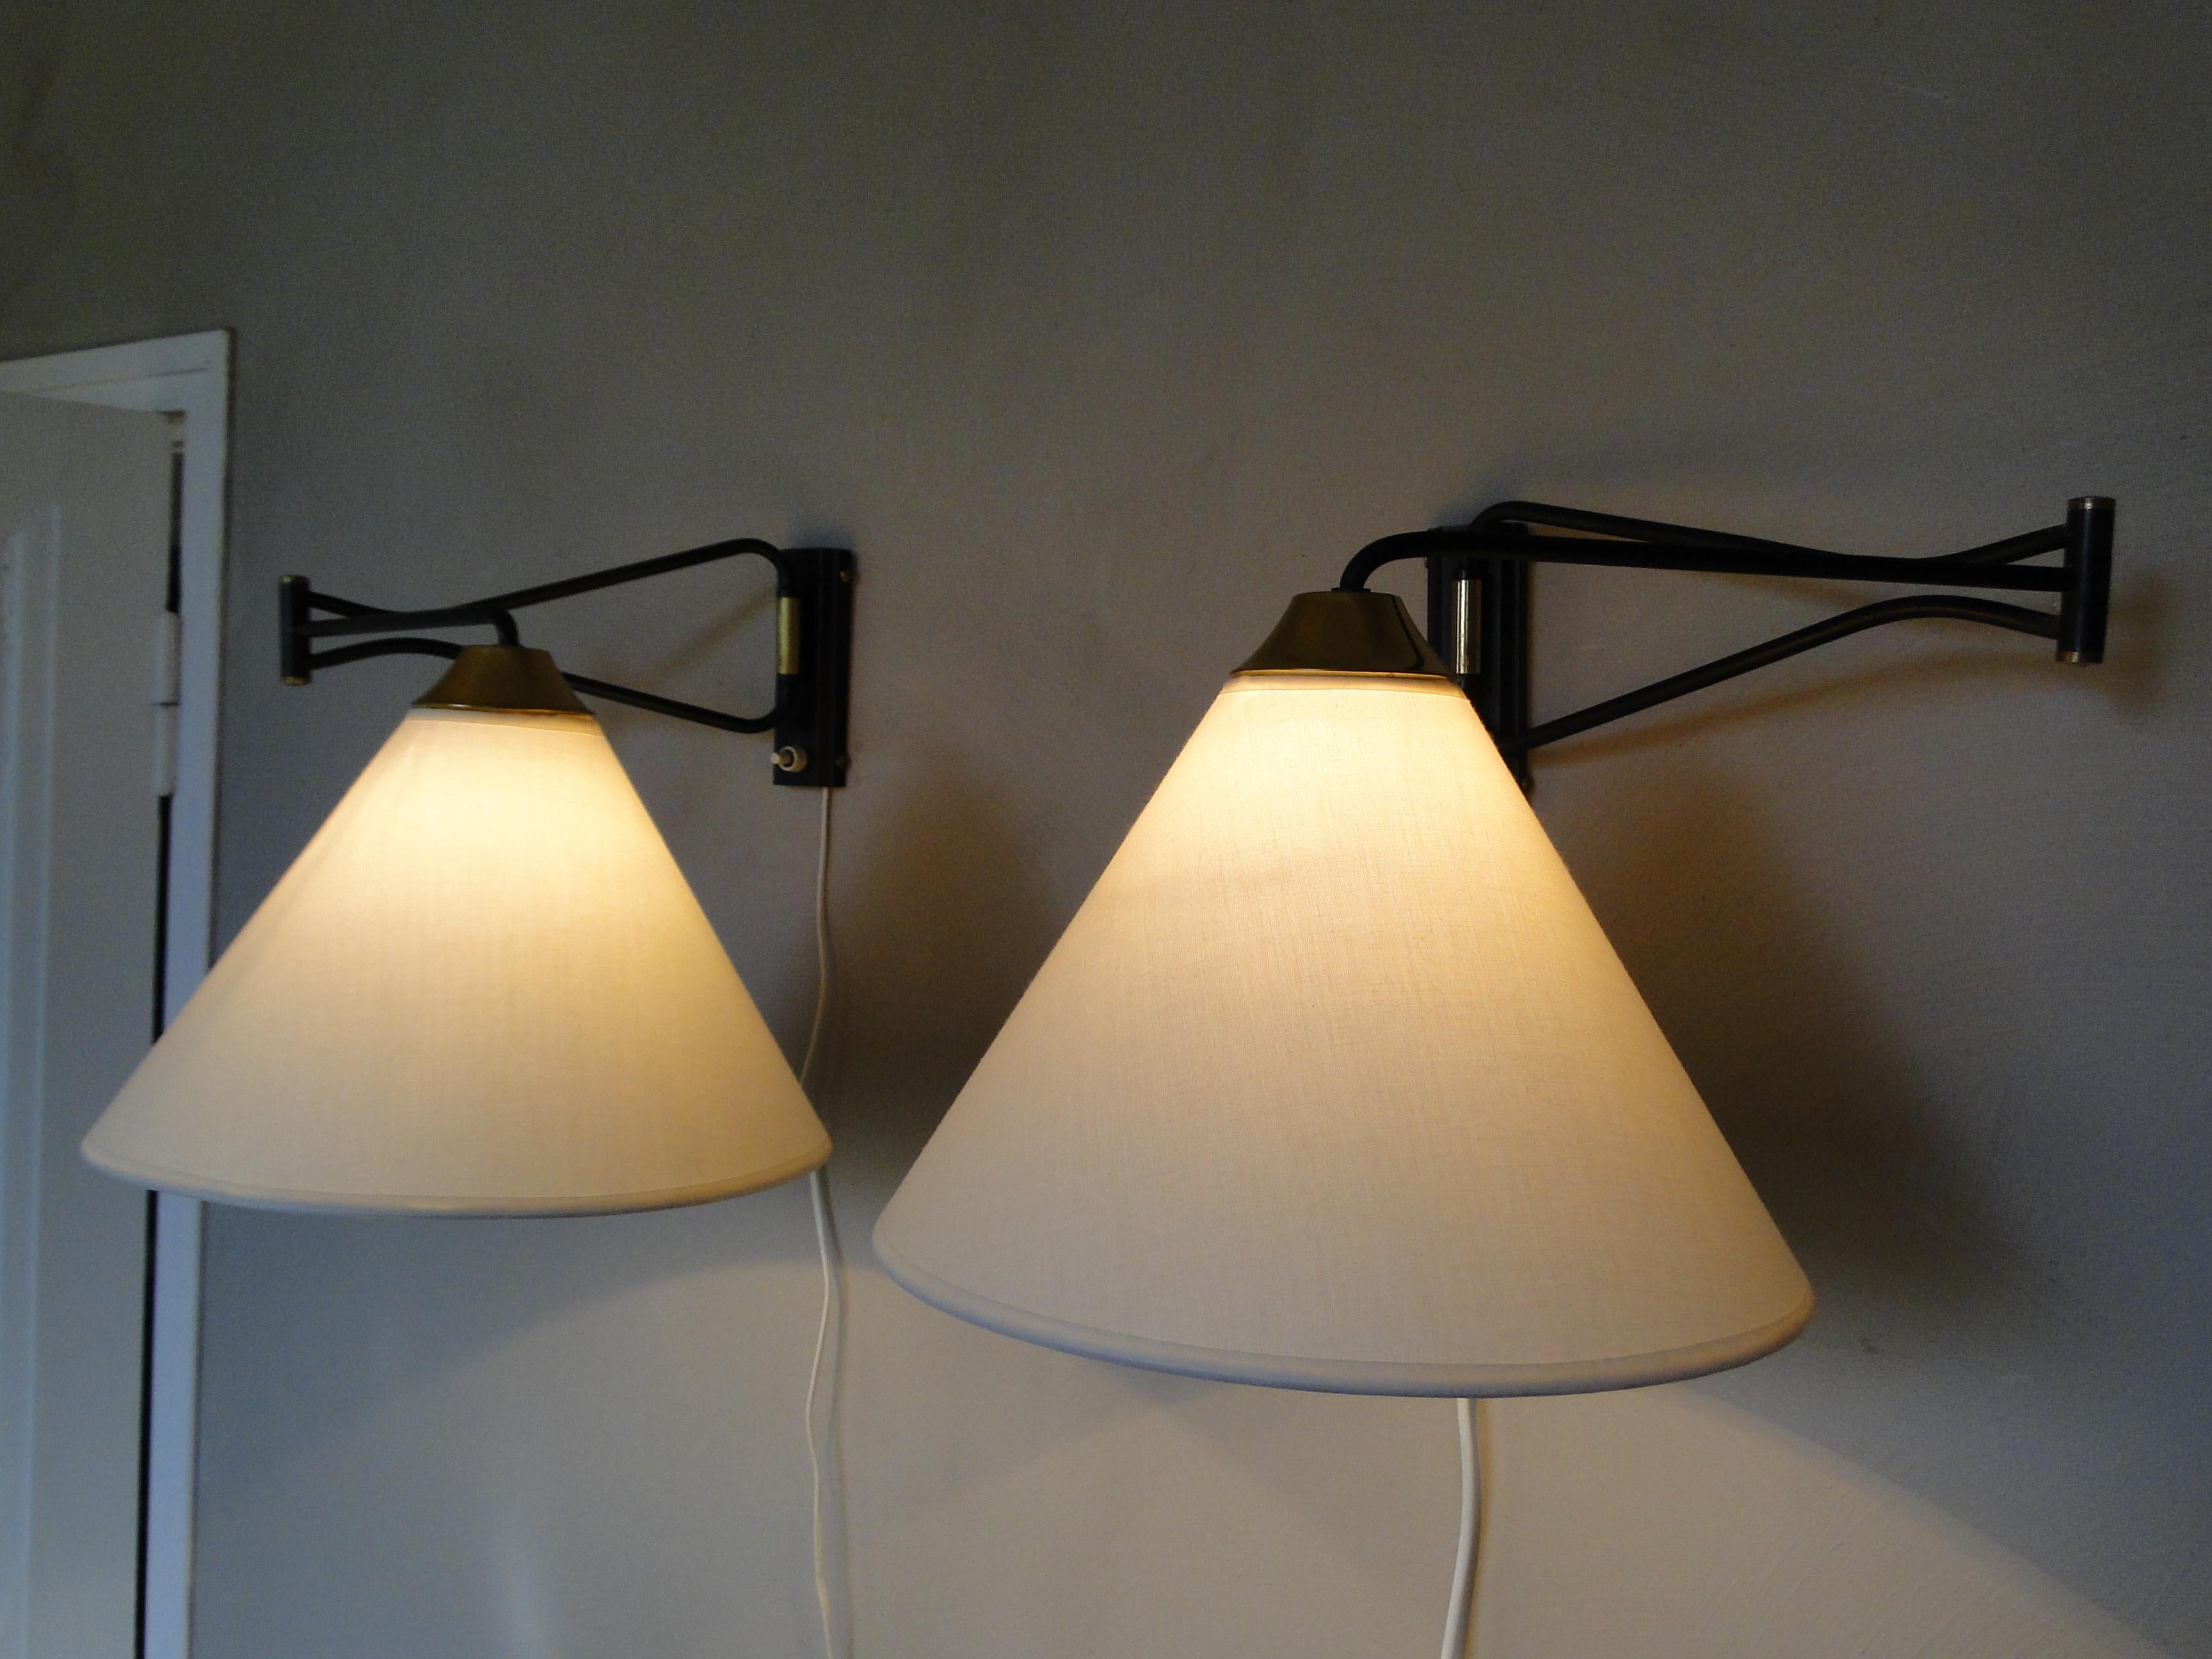  Pair of Rene Mathieu Swing Arm Sconces Wall lamp French Adjustable  Lunel Arlus For Sale 7